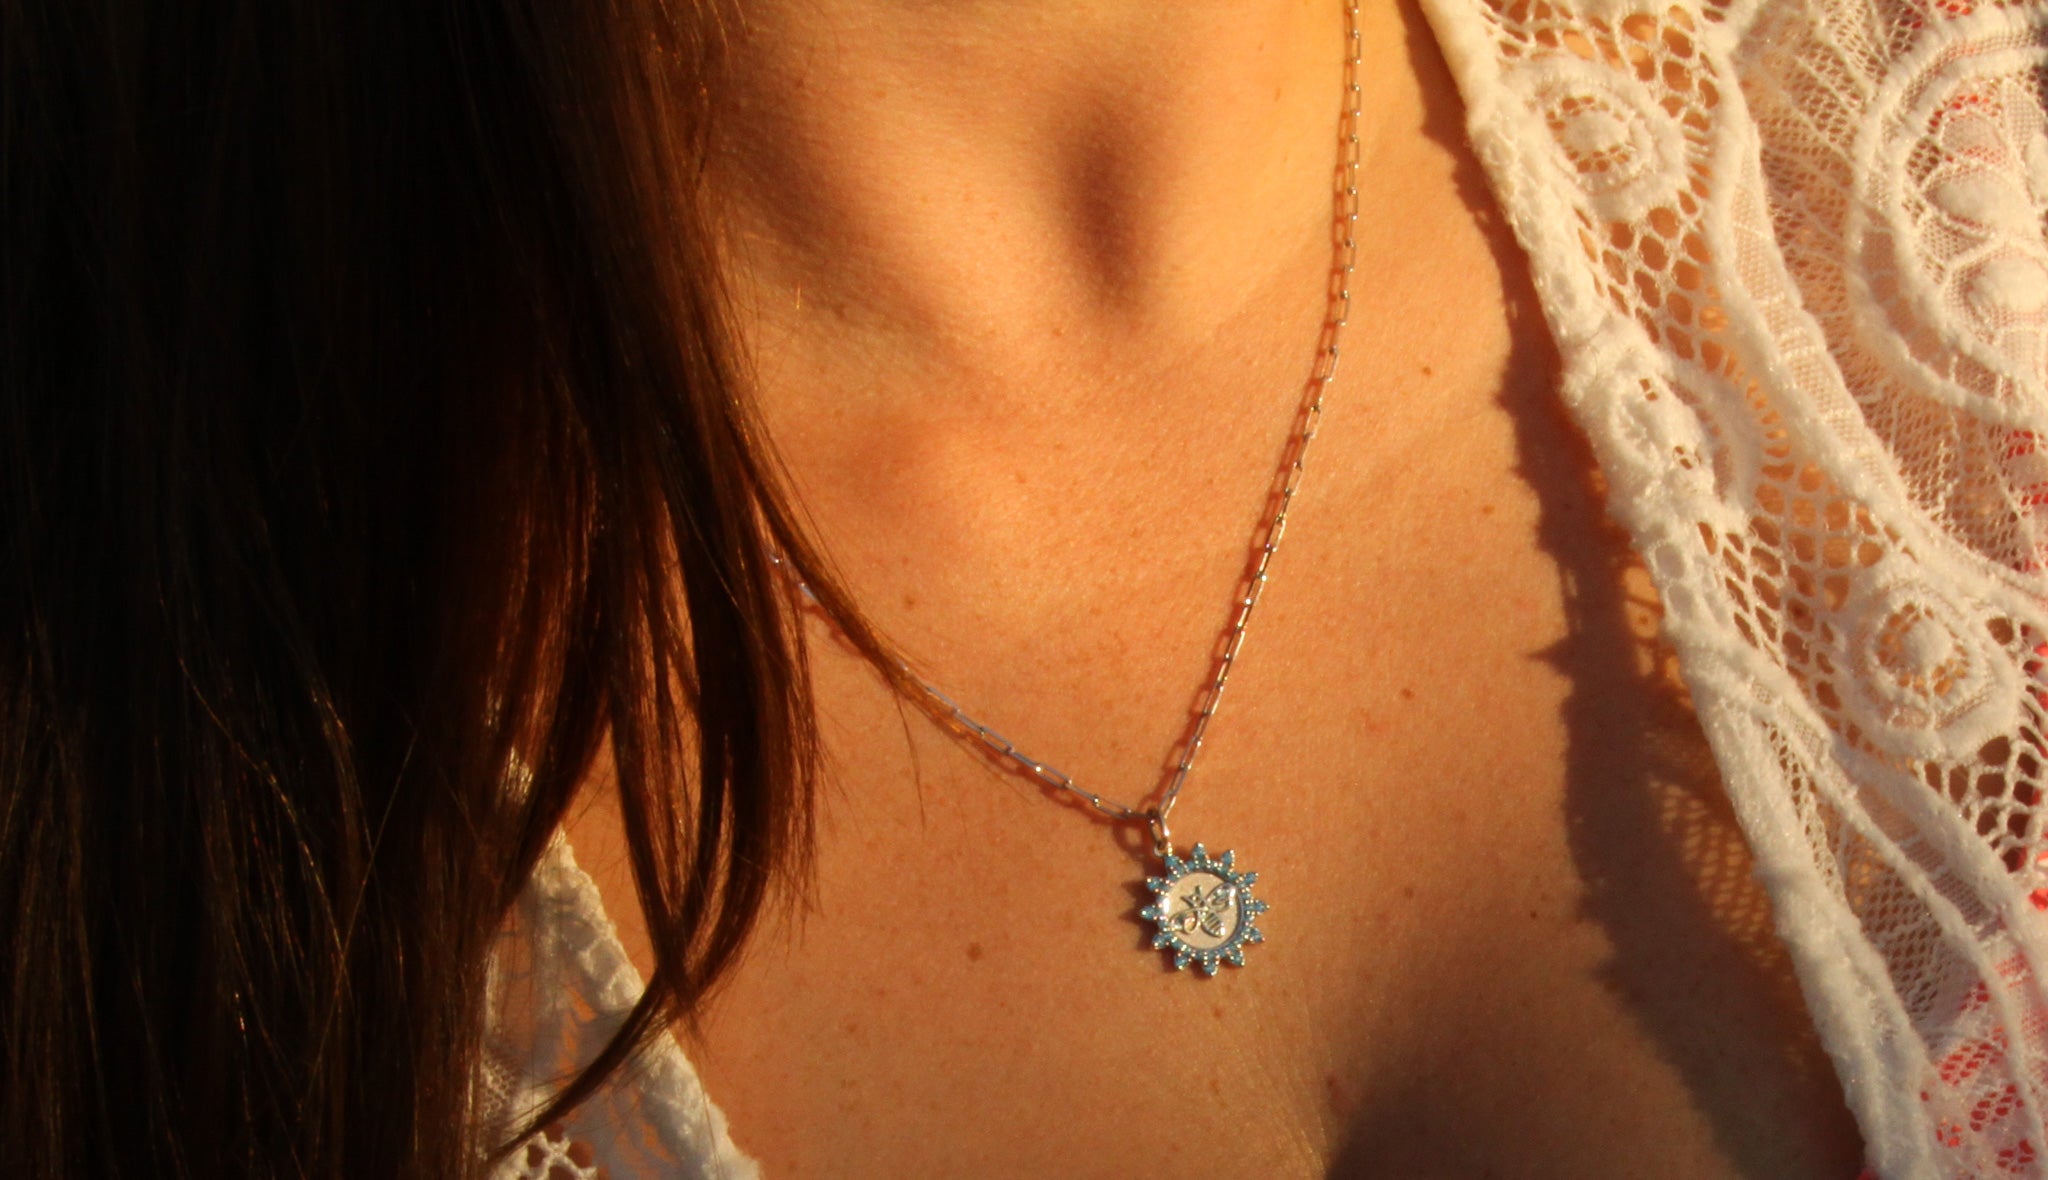 Be Luxurious - Silver & Blue Topaz Bee-Inspired Pendant & Necklace